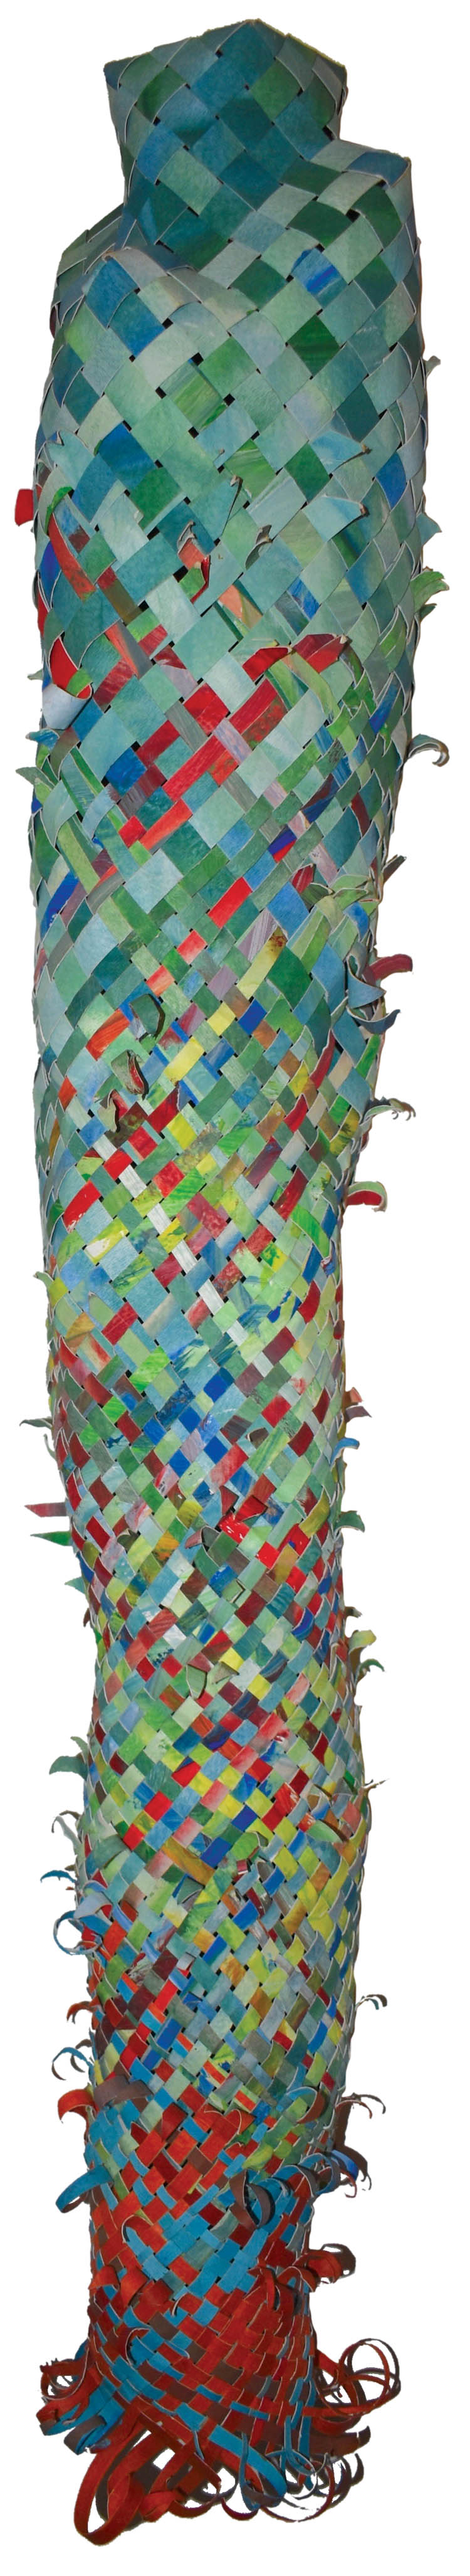 The sculpture Wind Gourd of La‘amaomao was formed using recycled woven strips of painted and printed cotton fiber papers. photo by Fern Gavelek